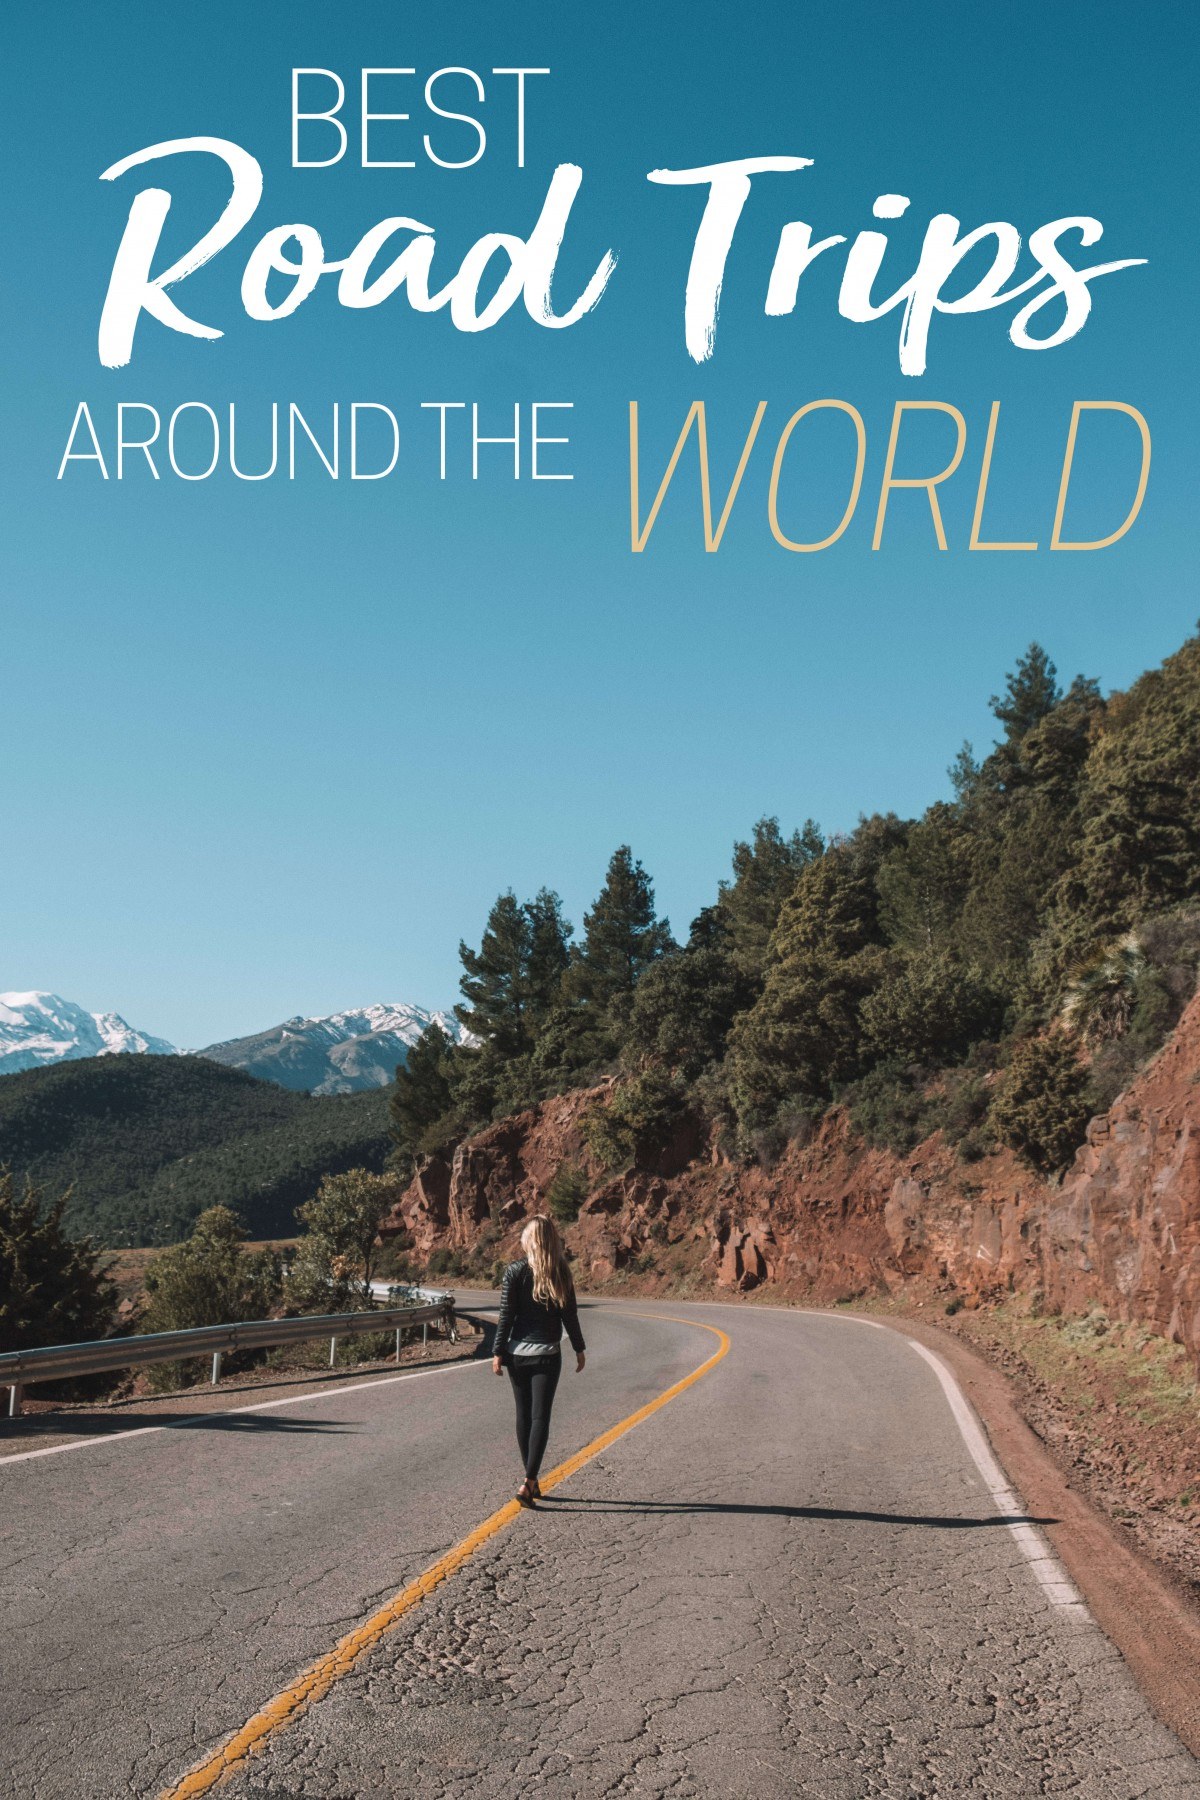 trips of world